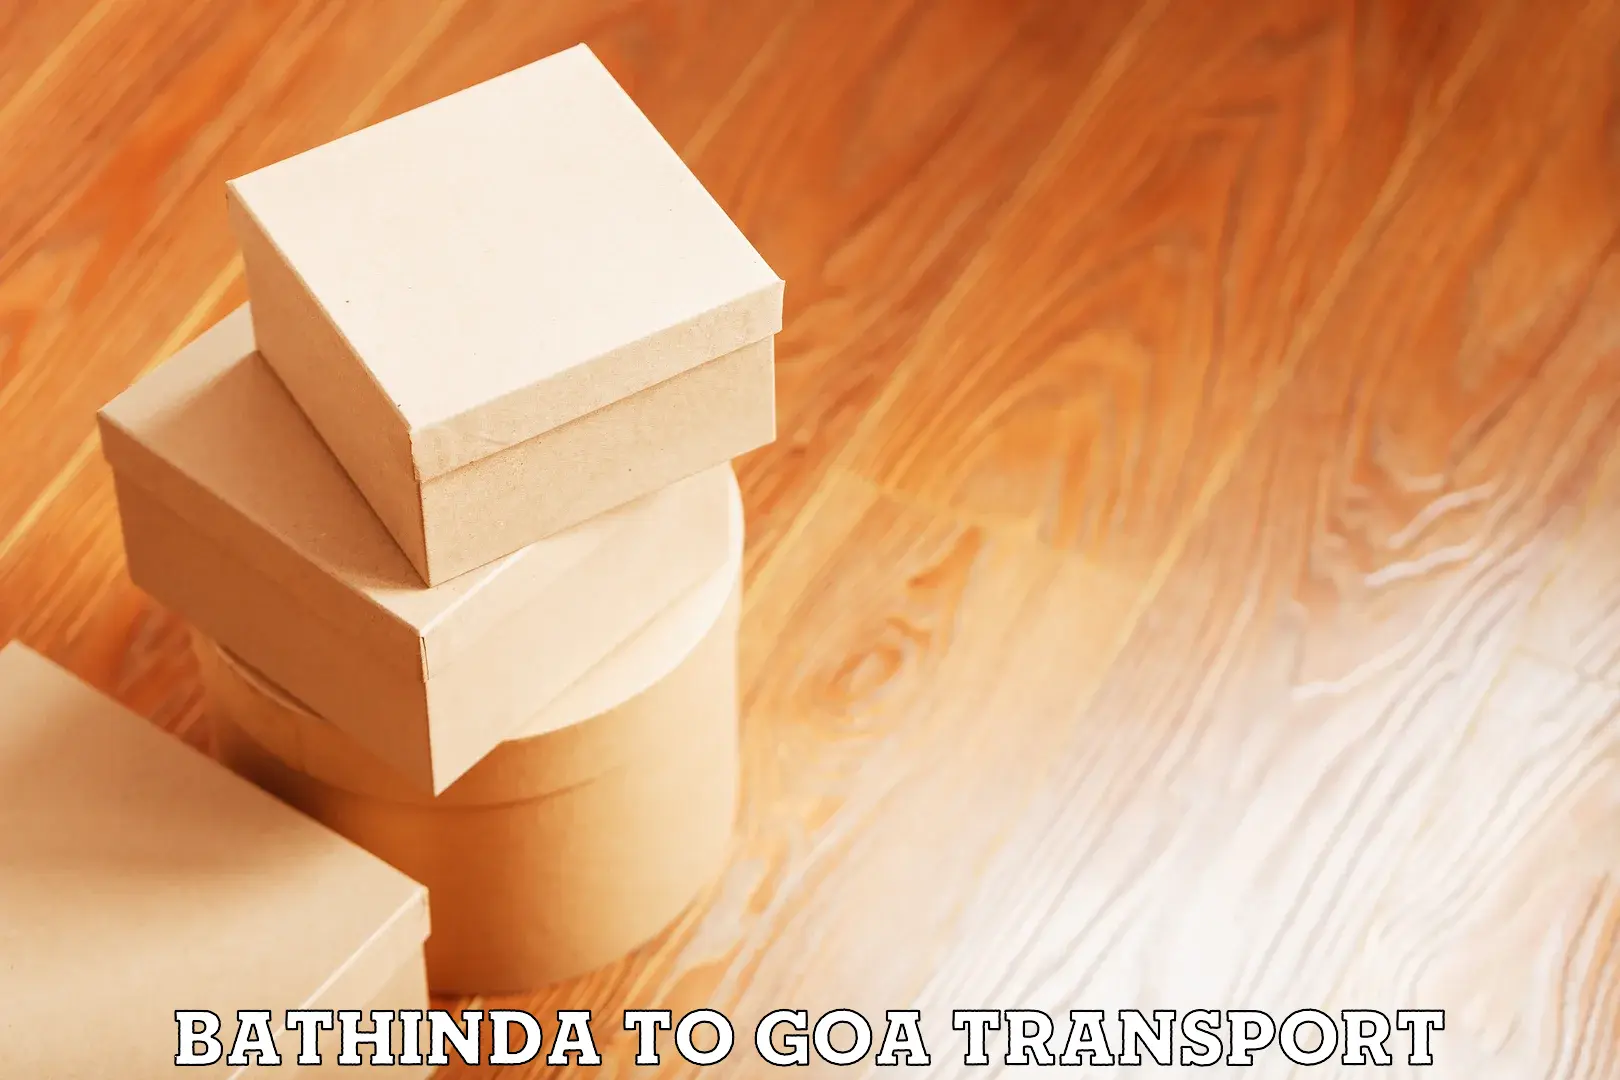 Transport bike from one state to another Bathinda to Goa